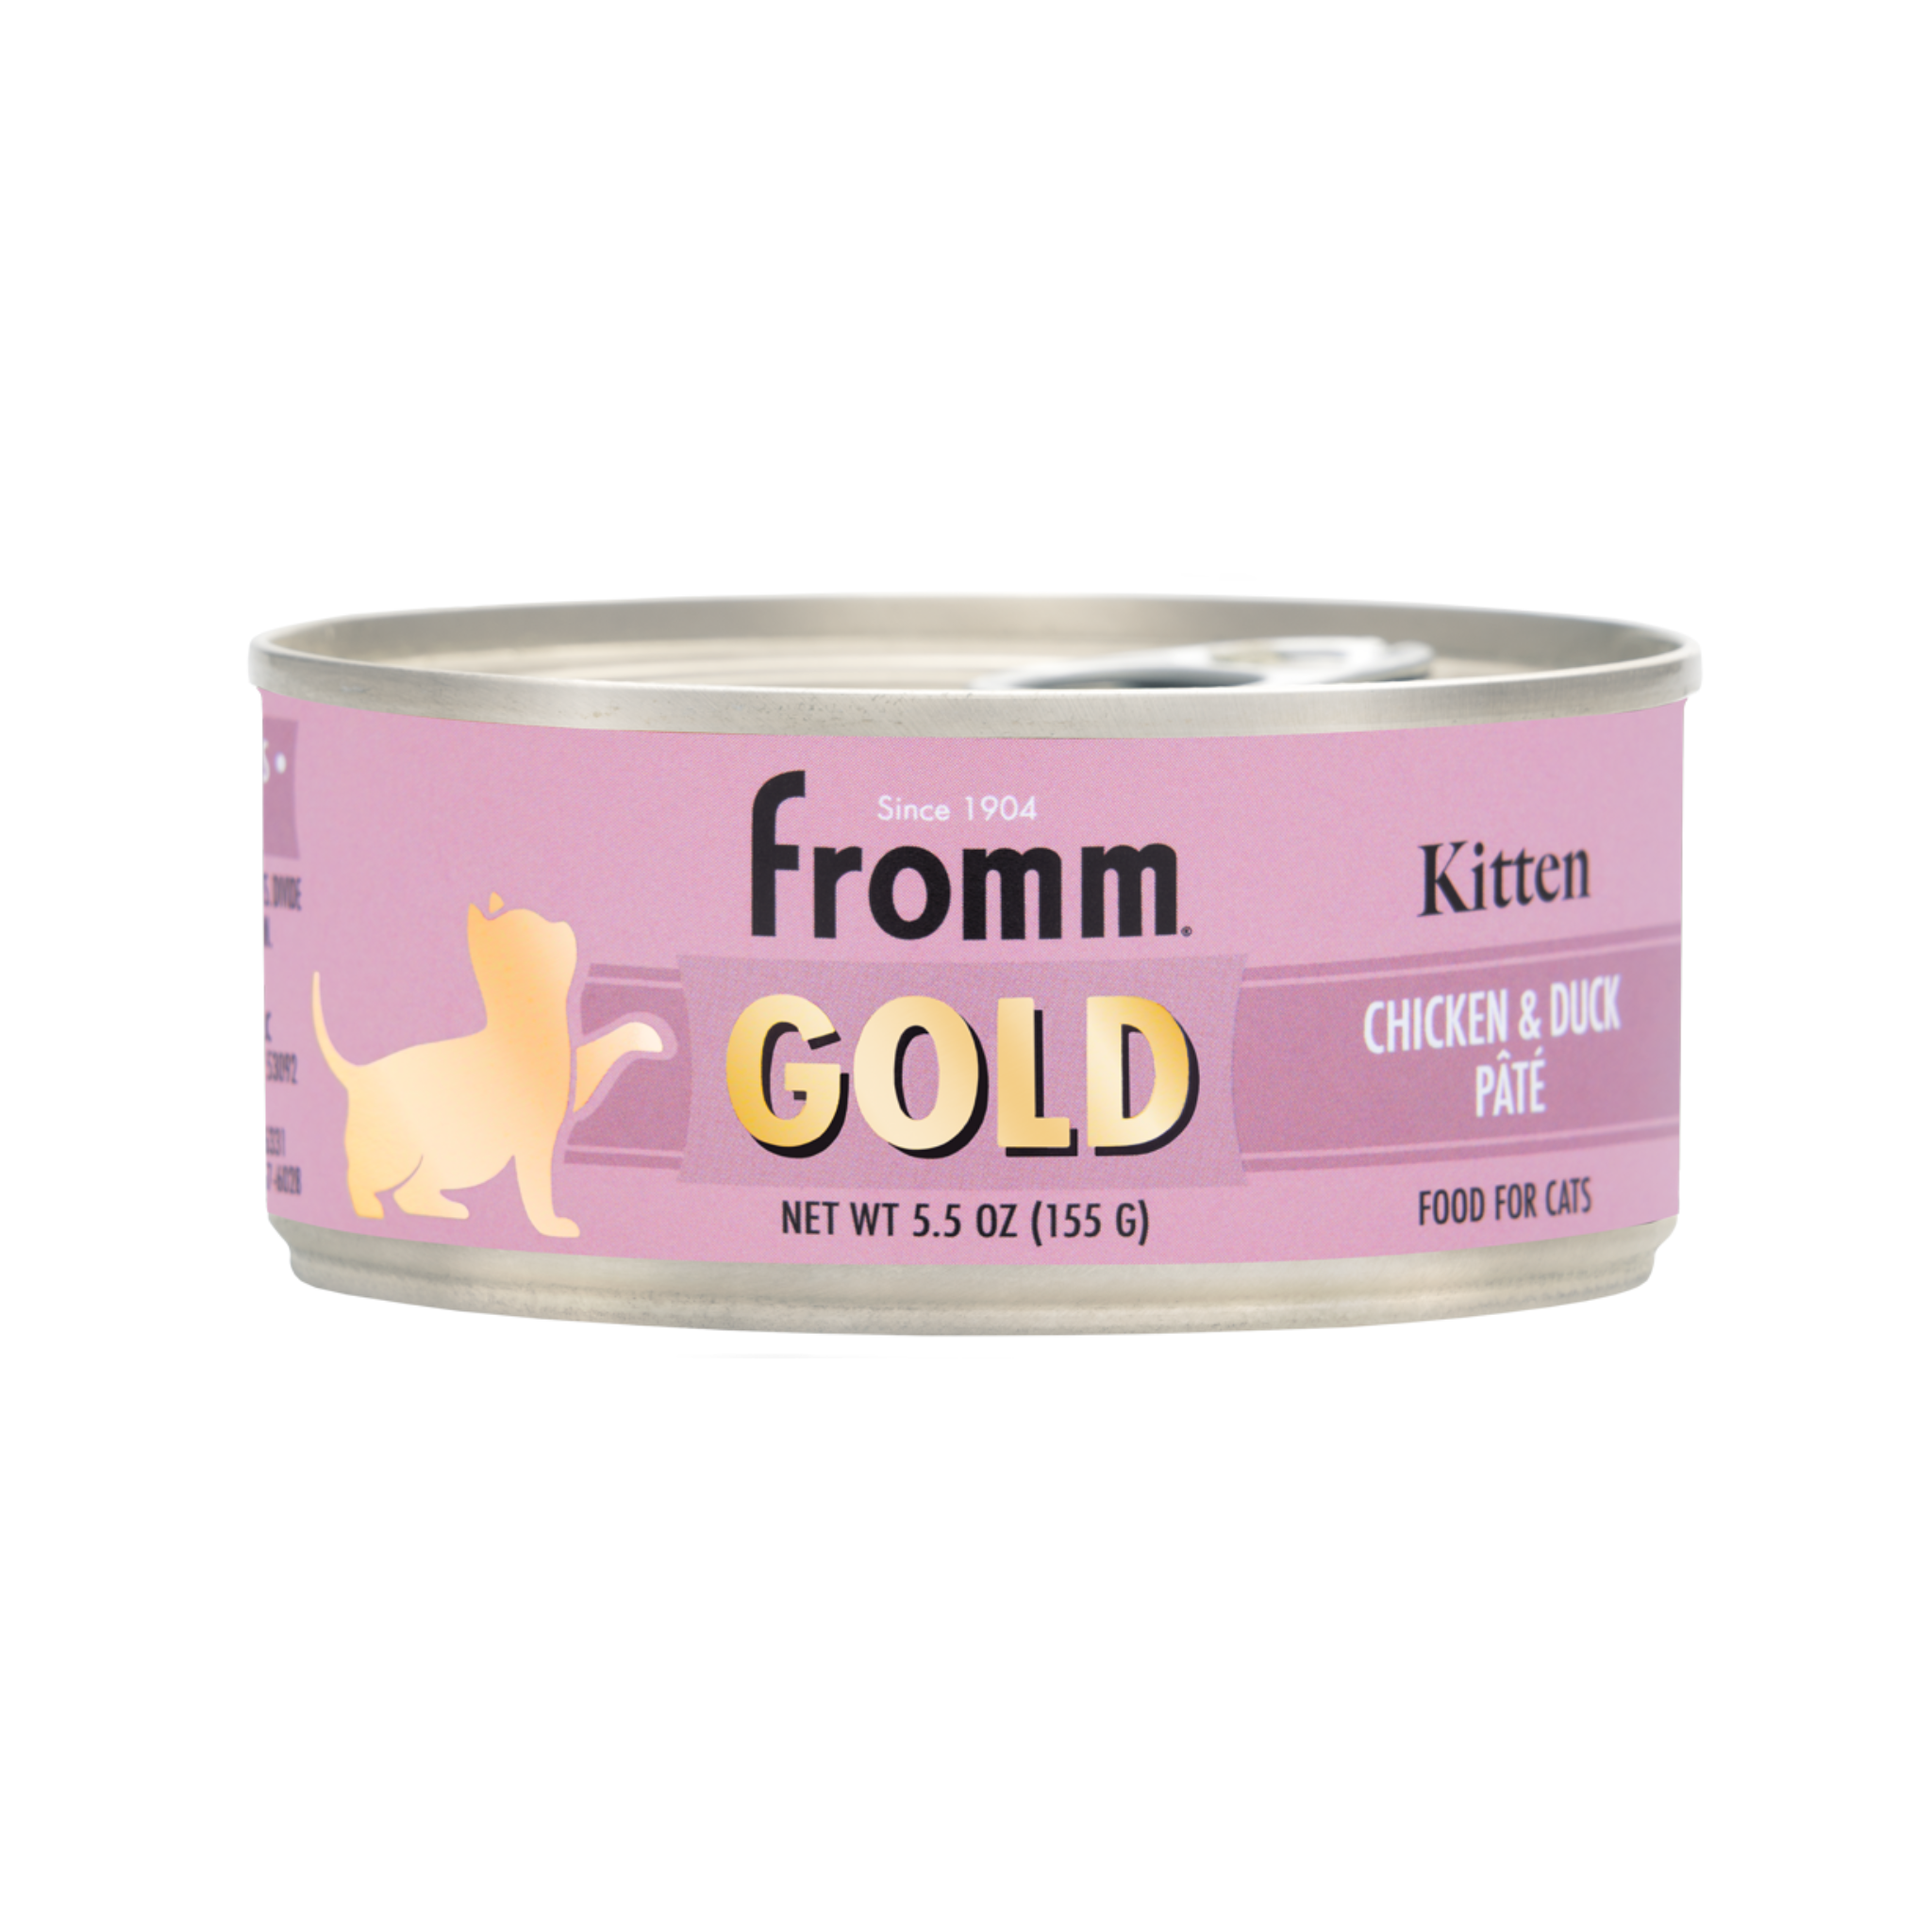 Fromm Gold Chicken & Duck Pate Kitten Canned